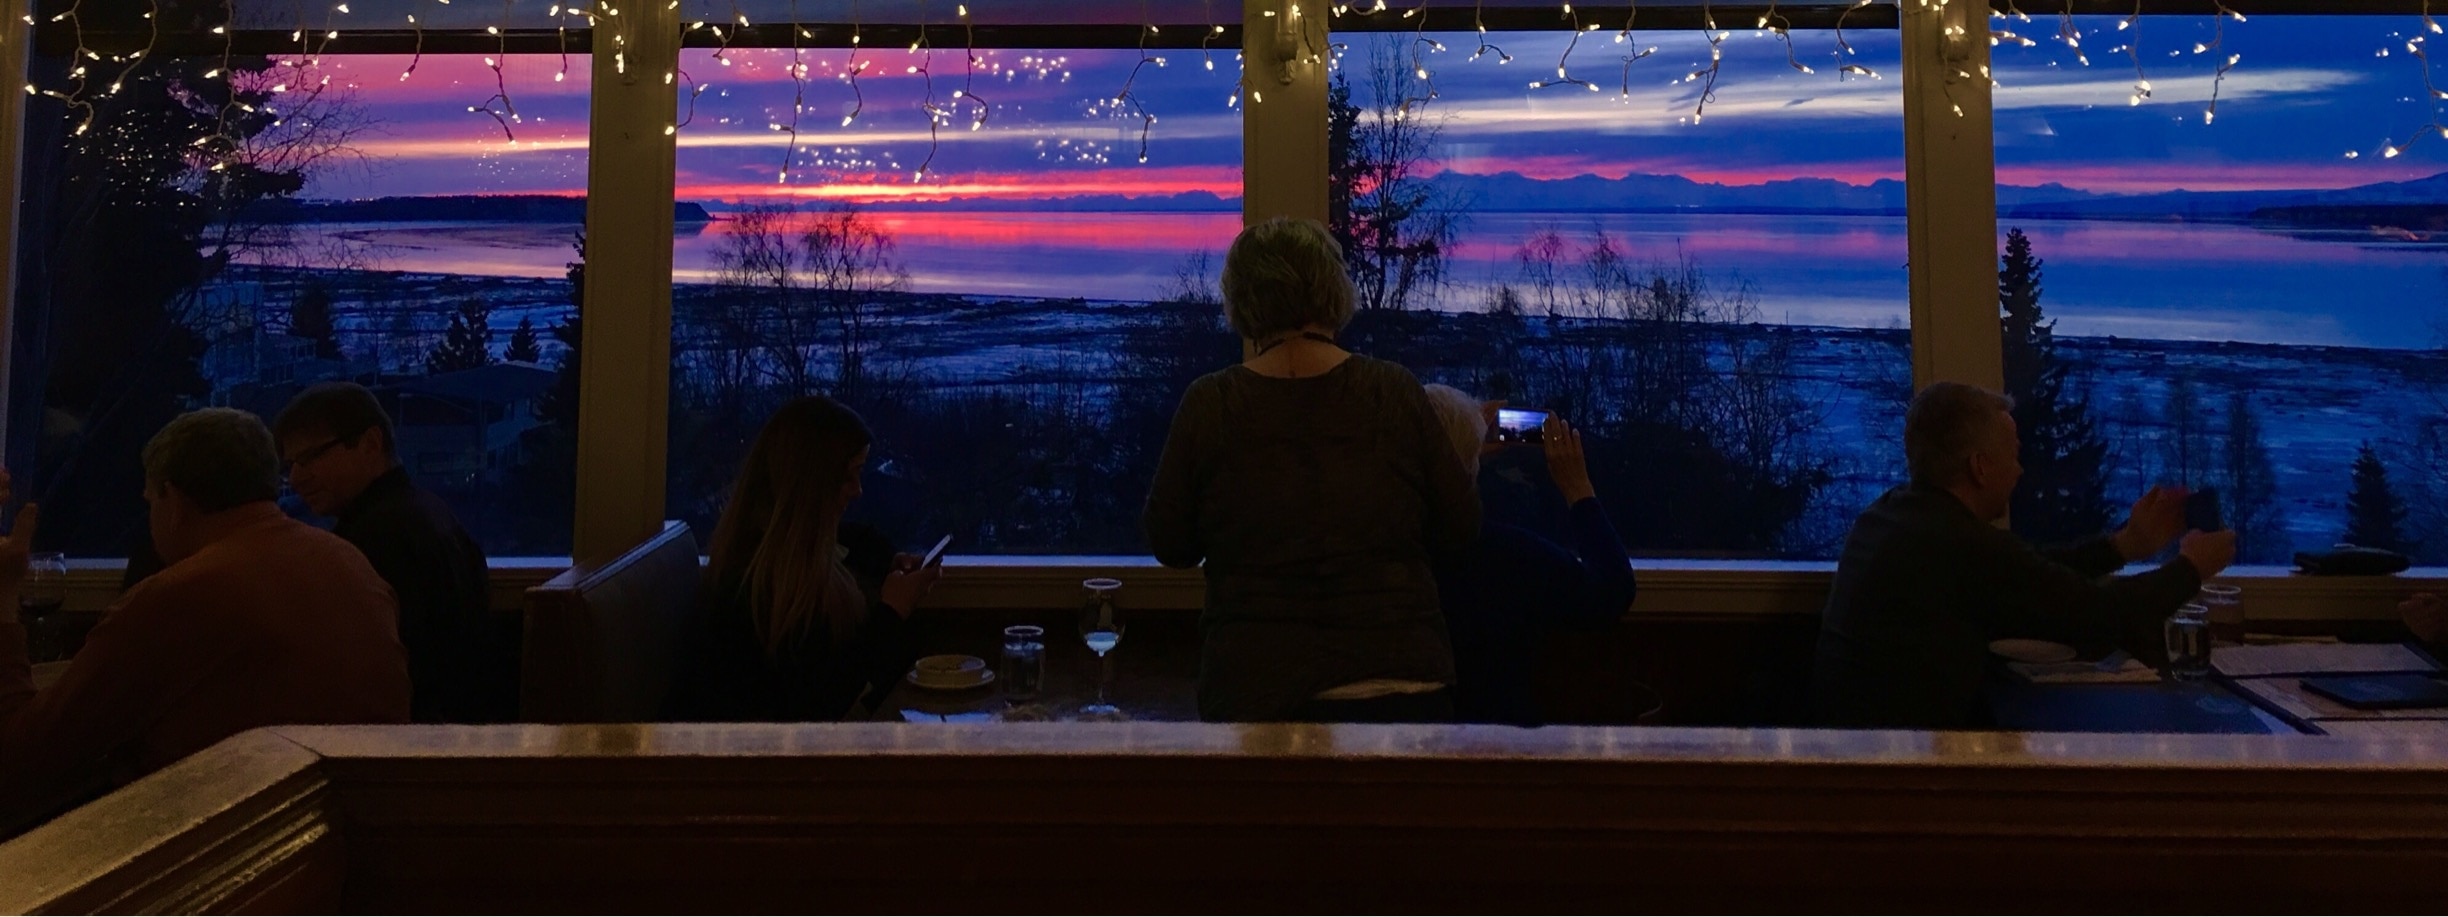 Great sunset views at this restaurant in Anchorage AK. It is is absolutely stunning. 